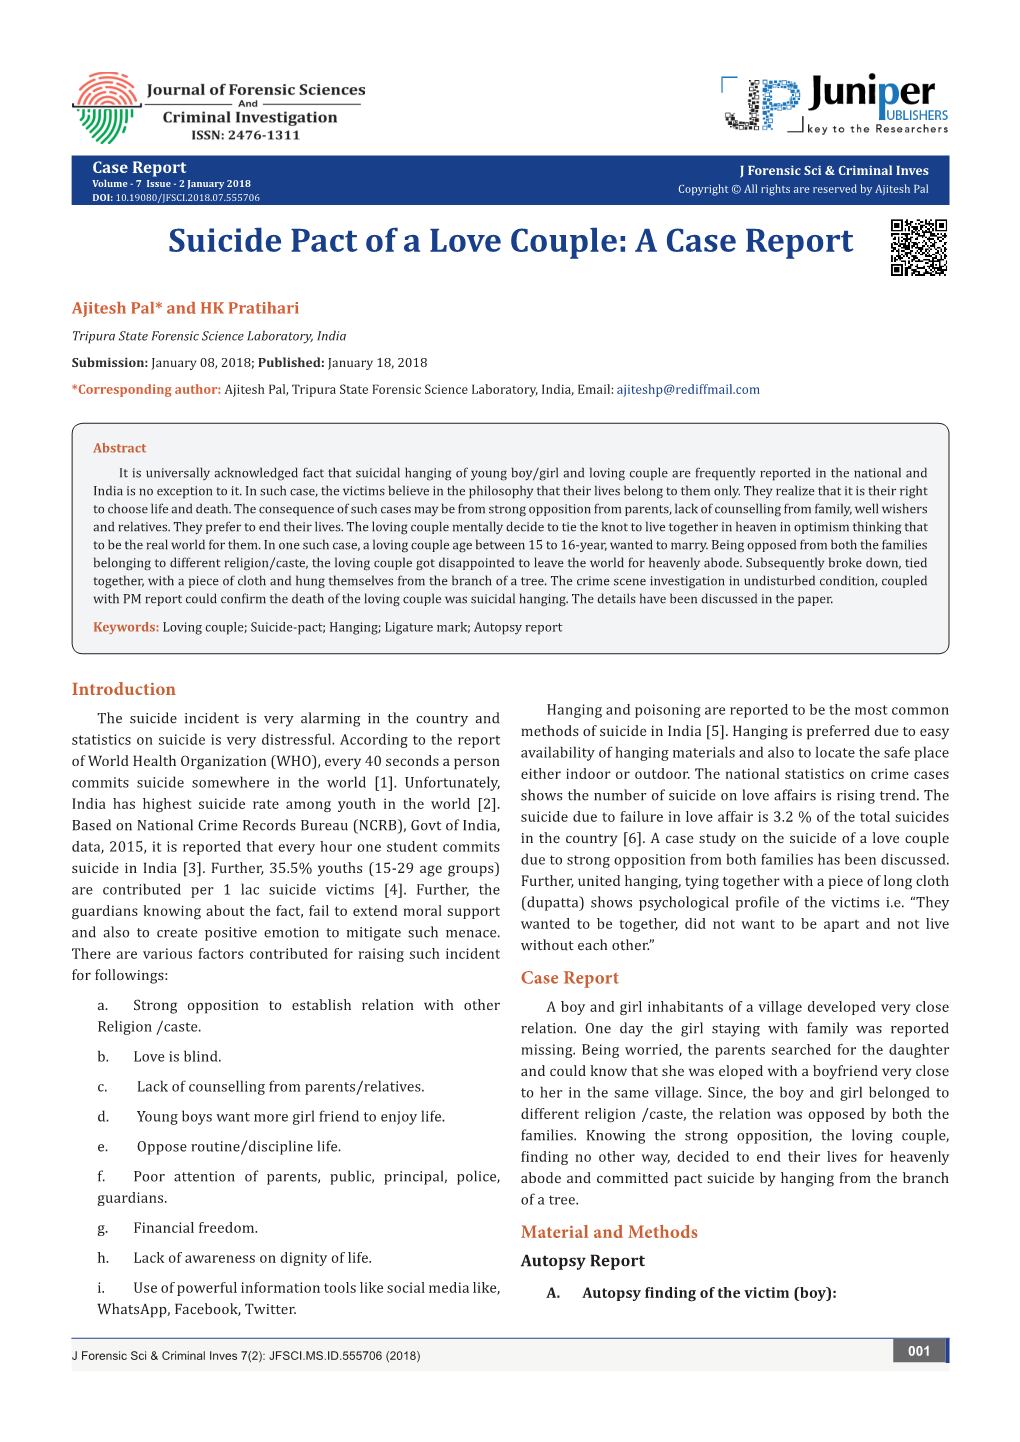 Suicide Pact of a Love Couple: a Case Report